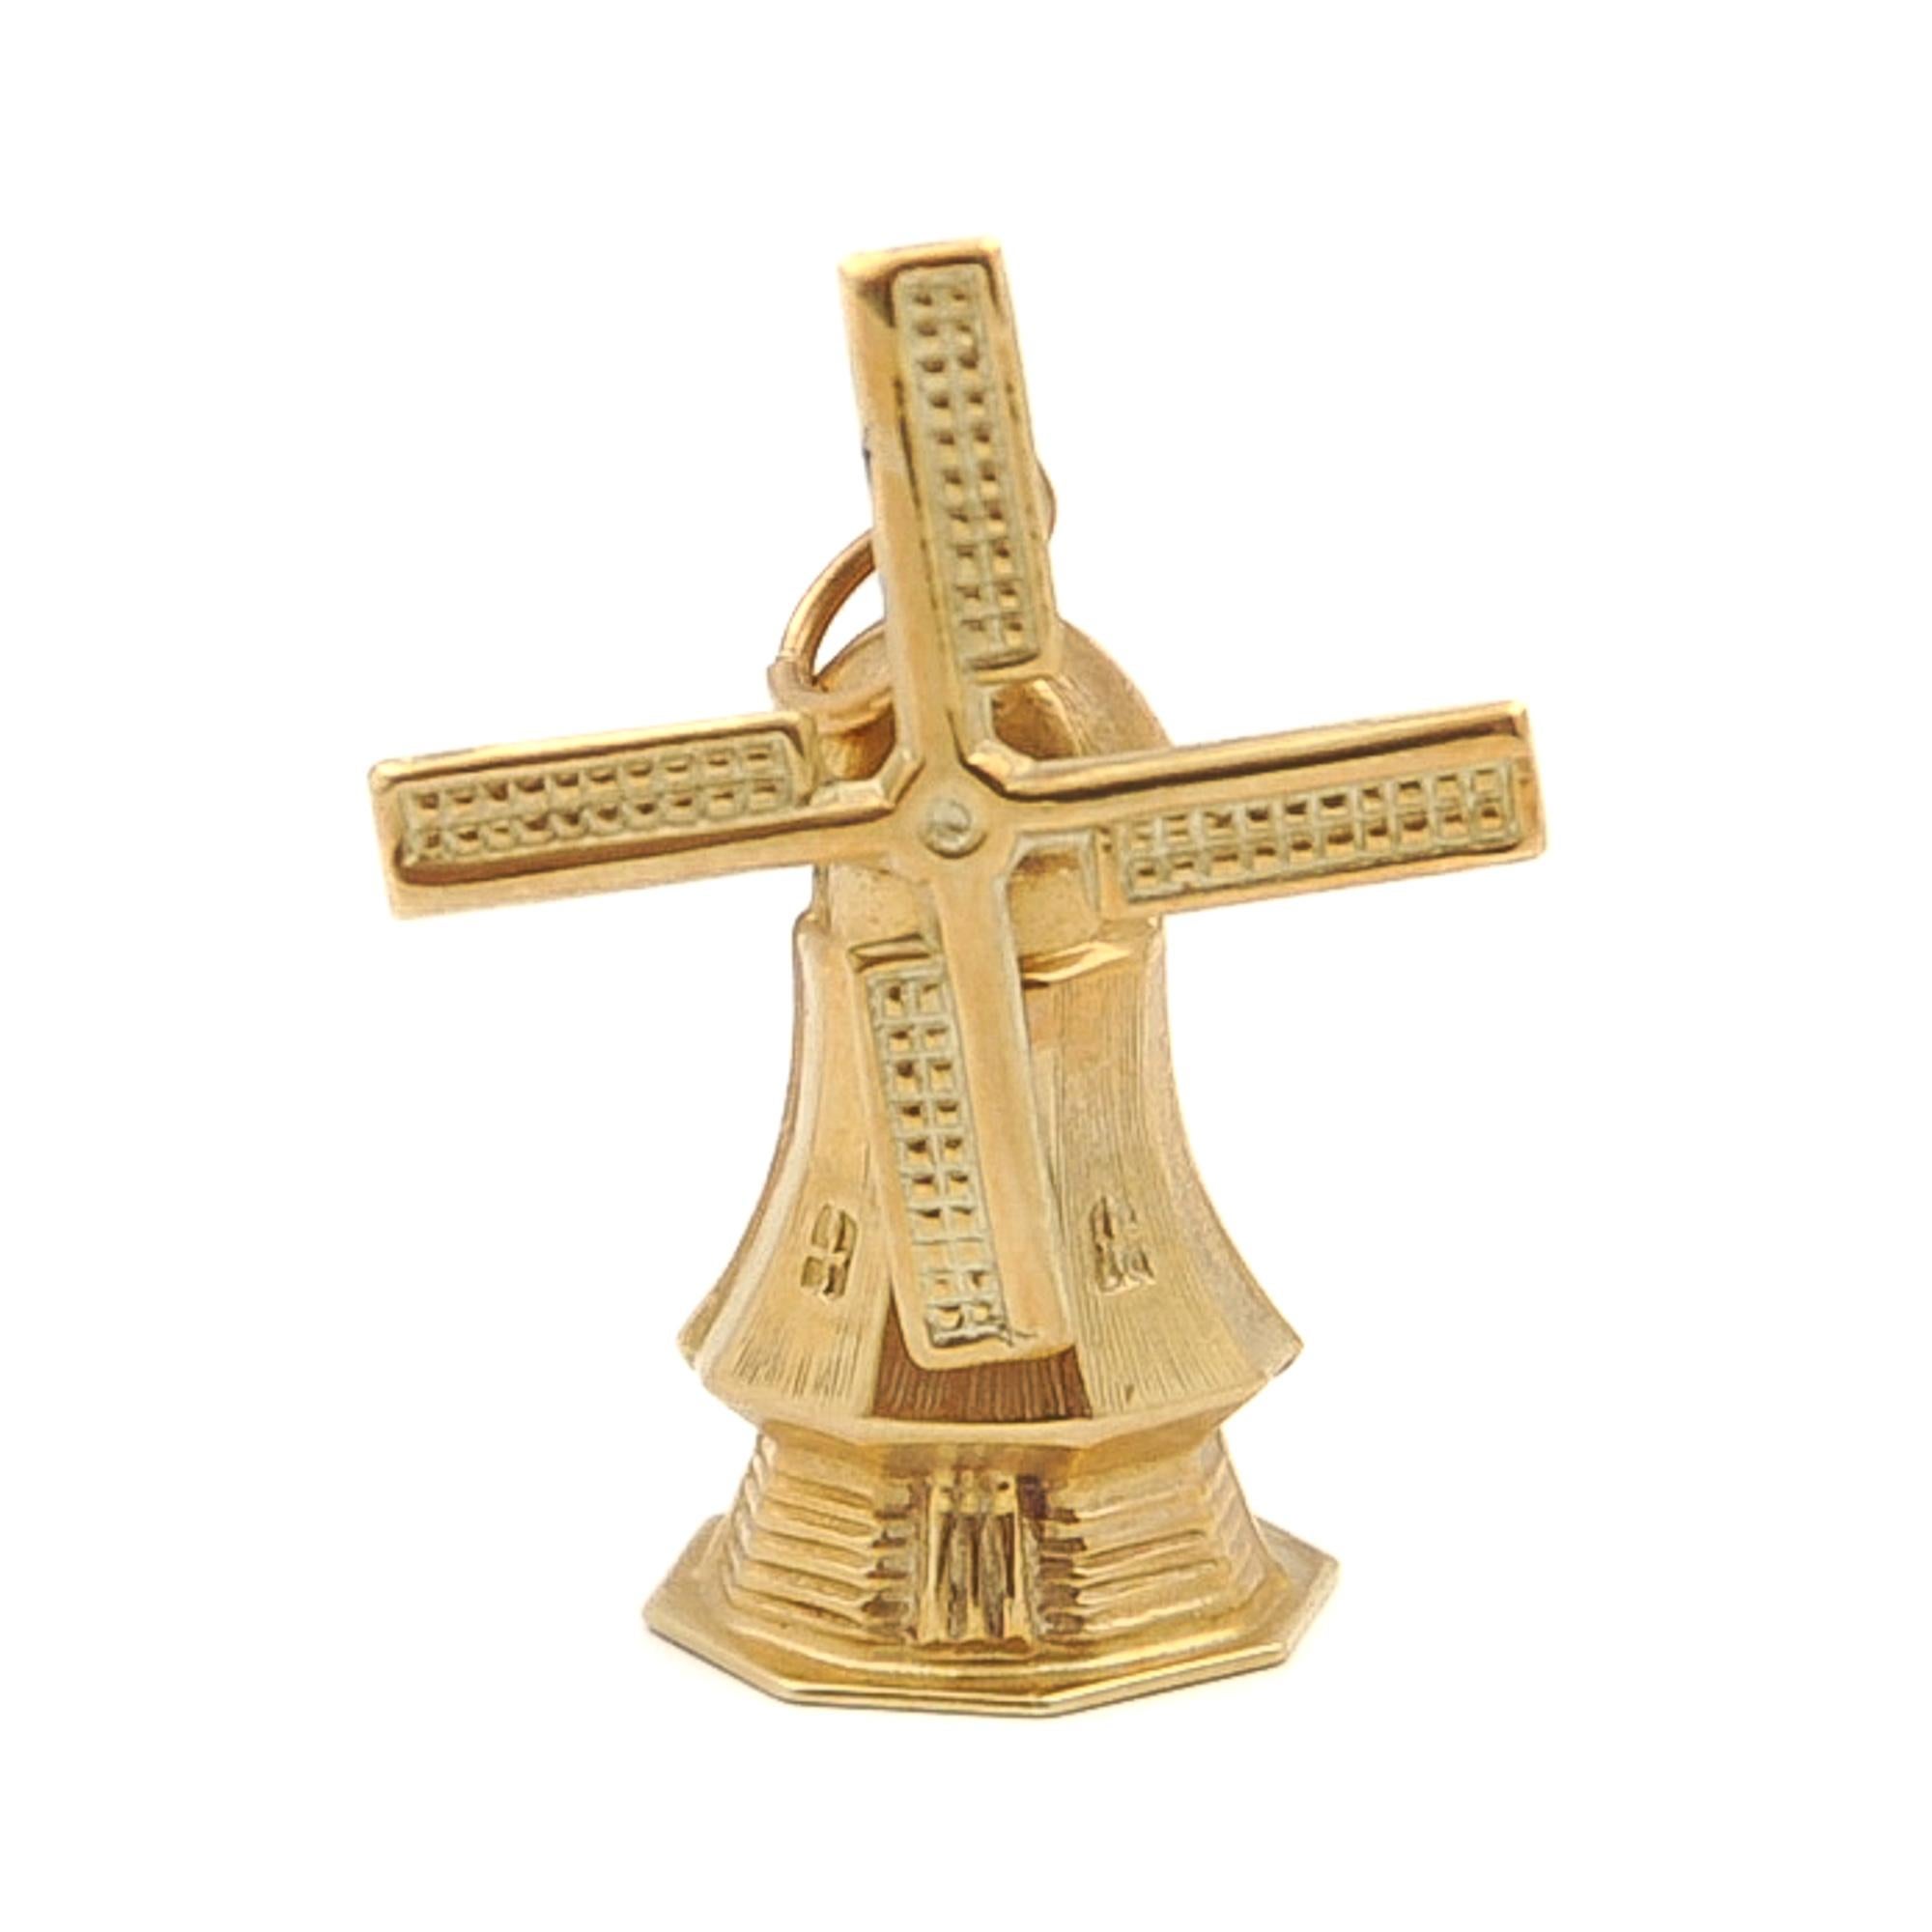 A beautiful large three-dimensional Dutch windmill charm pendant. The octagon windmill is made in 14 karat gold and is nicely detailed with horizontal 'beams' on the hull and windows on the attic floors. The blades of the windmill are movable and